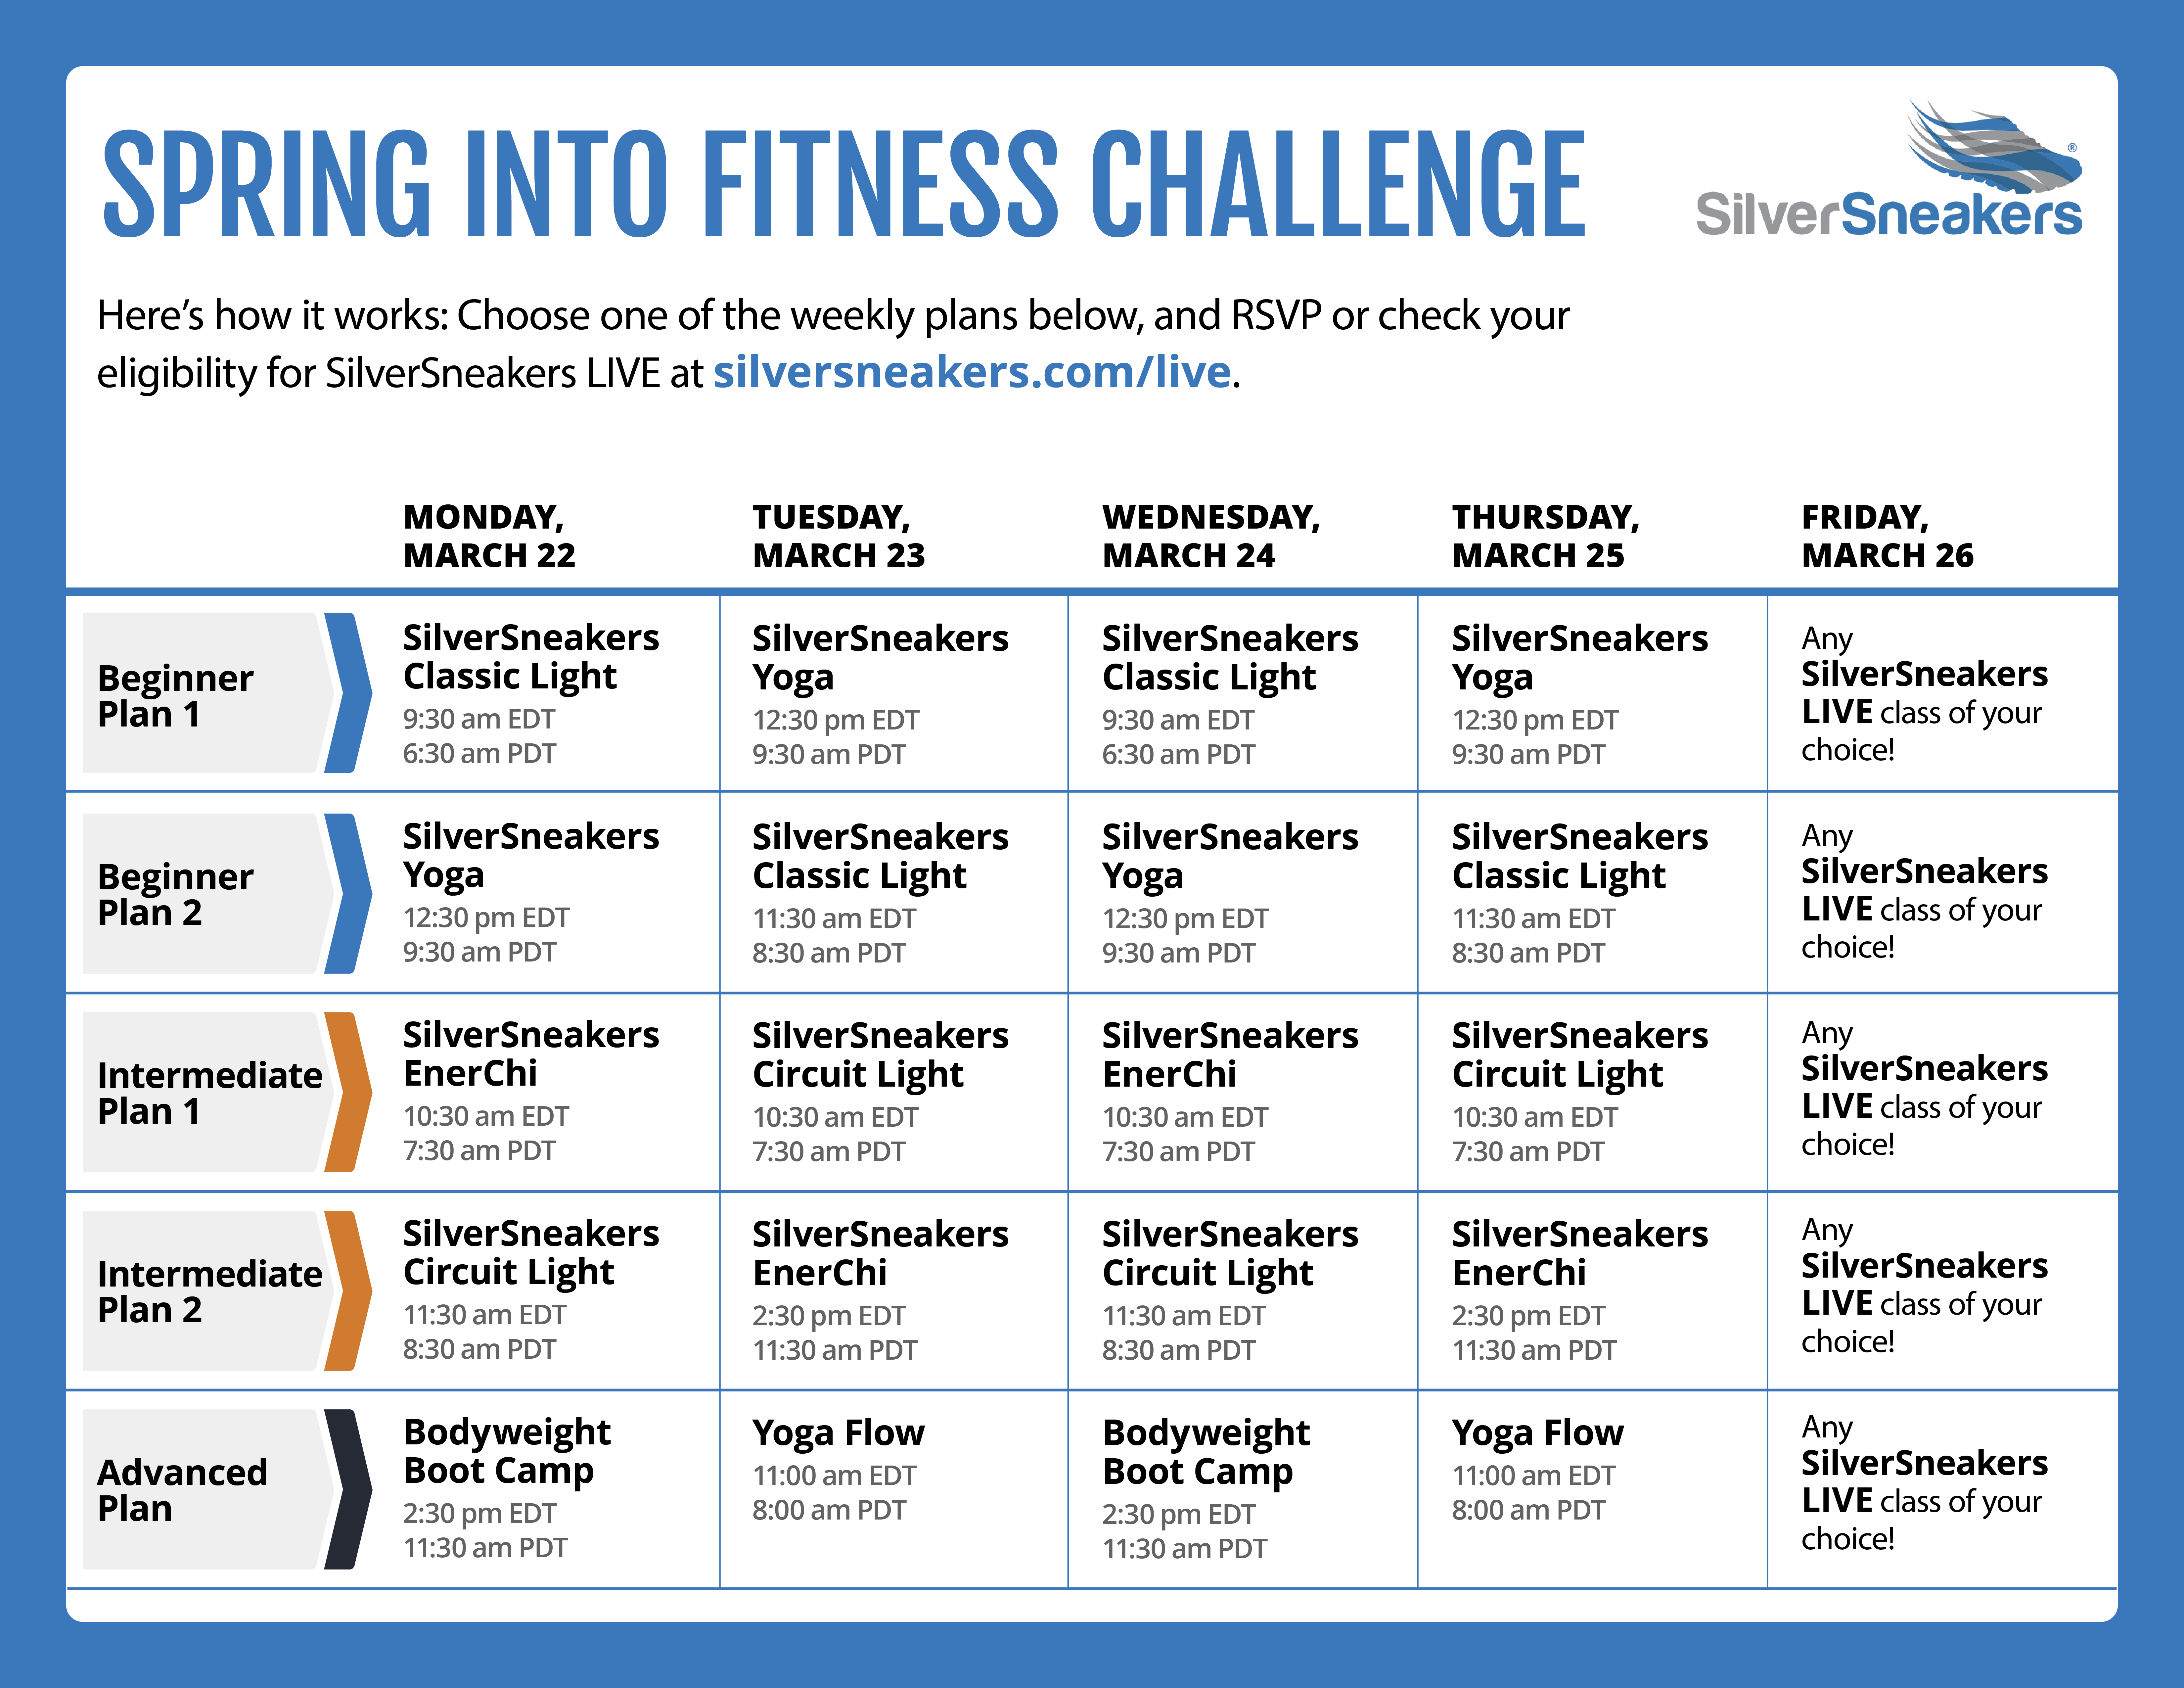 SilverSneakers LIVE Challenge: Spring into Fitness - SilverSneakers